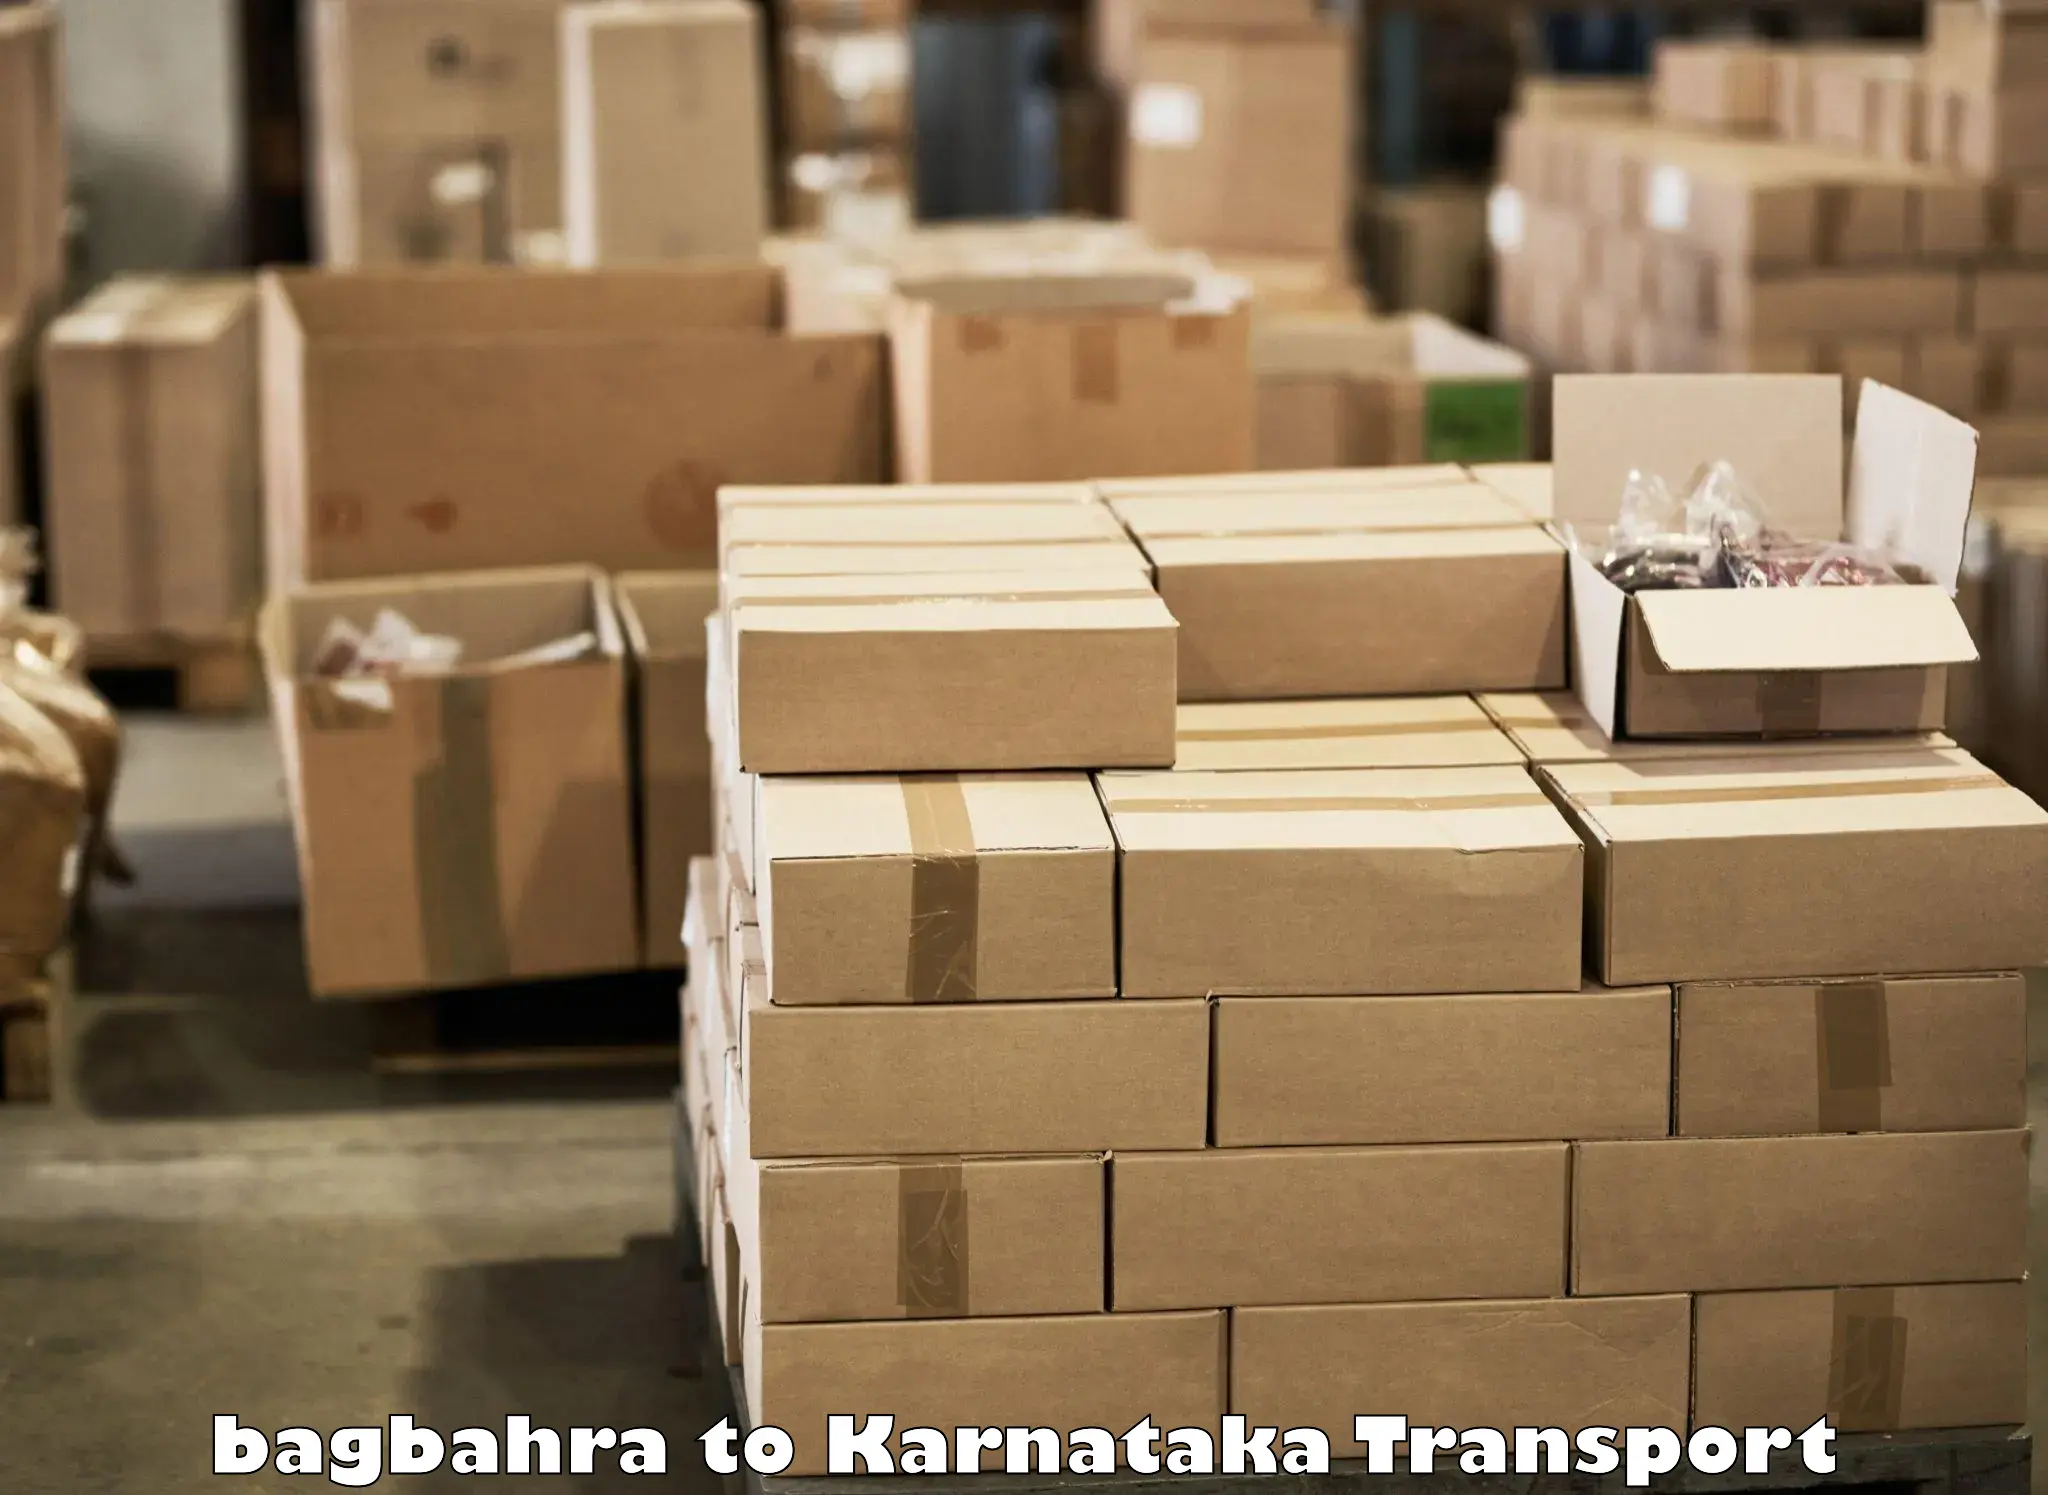 Nearby transport service bagbahra to Rona Gadag